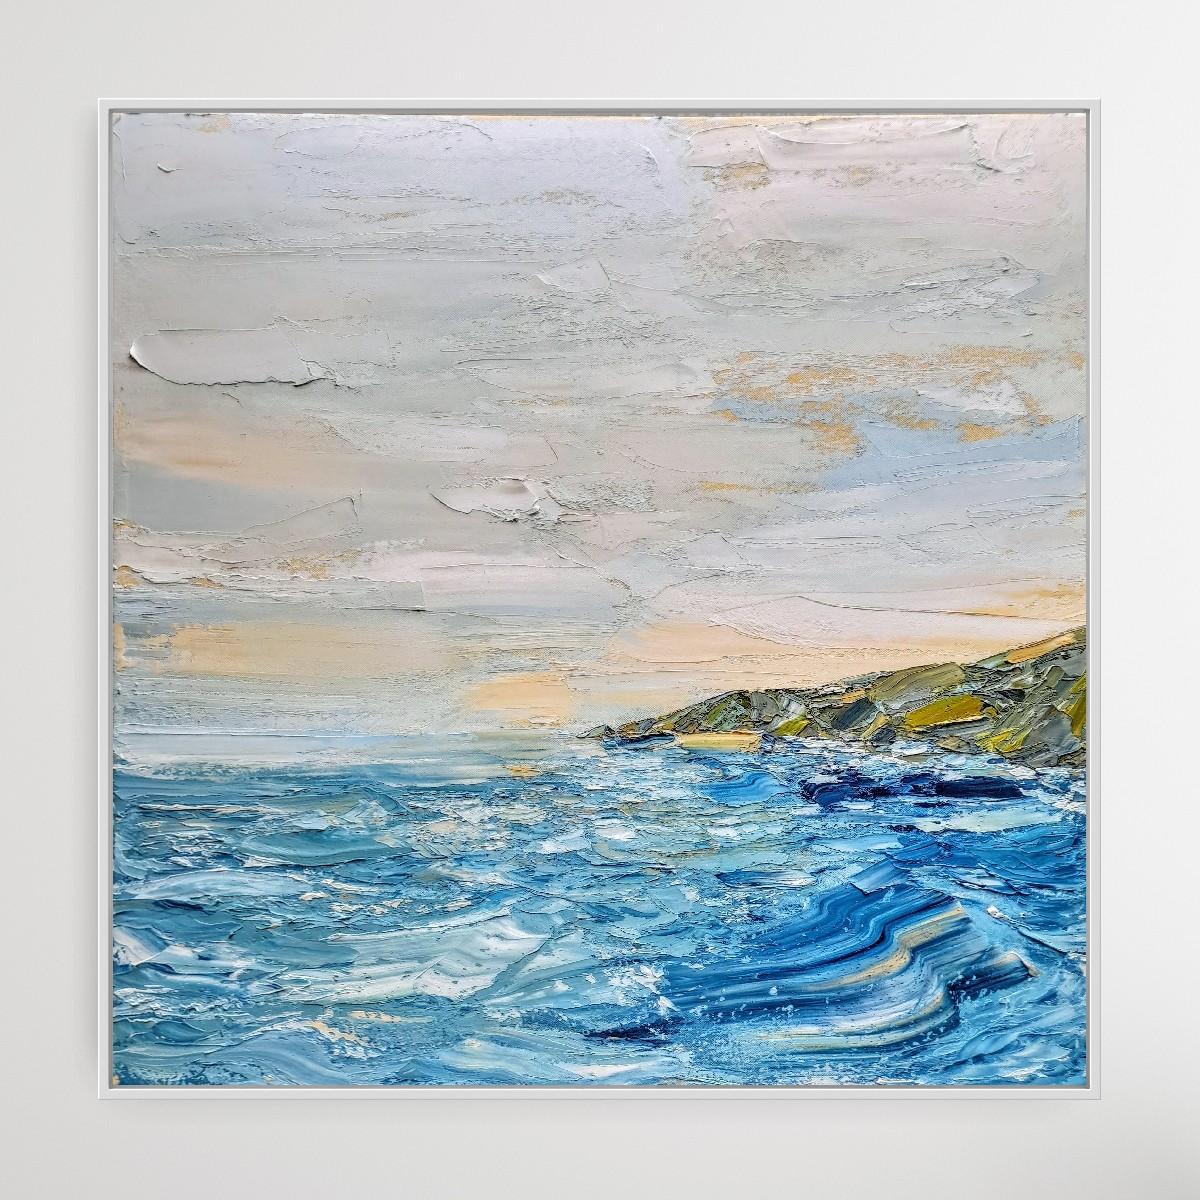 At home in the headlands, Cornwall, peinture originale, Contemporary, Seascape - Impressionnisme Painting par Georgie Dowling